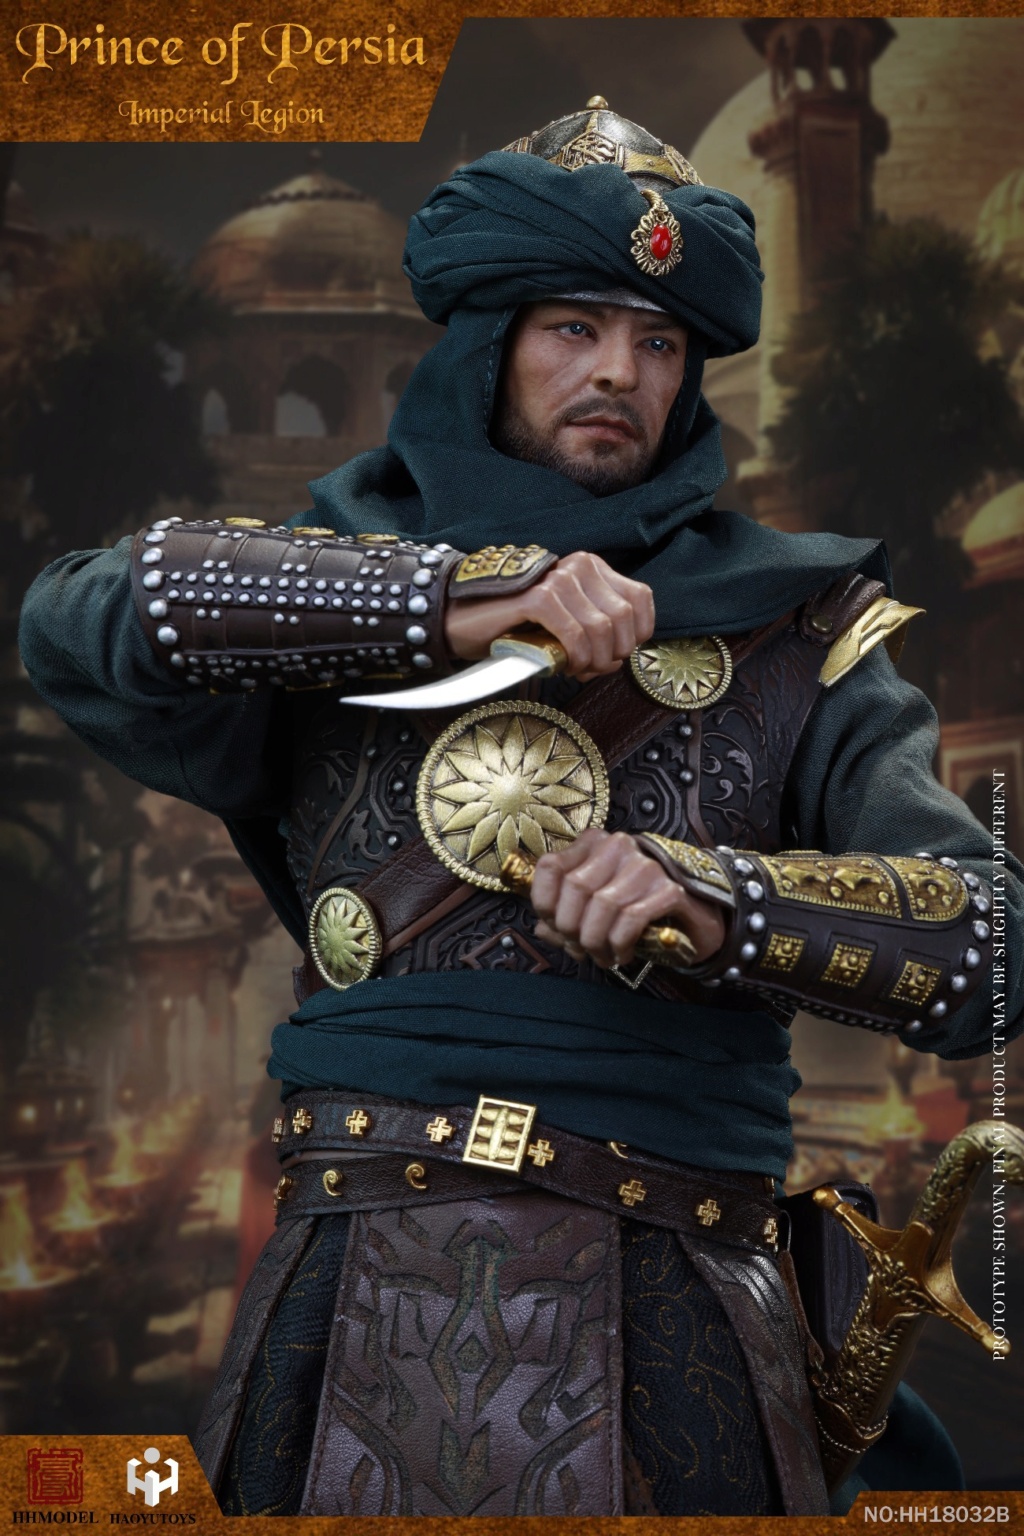 NEW PRODUCT: HHMODEL x HAOYUTOYS 1/6 Imperial Legion-Prince of Persia-A Standard Edition/B Luxury Edition 22400712